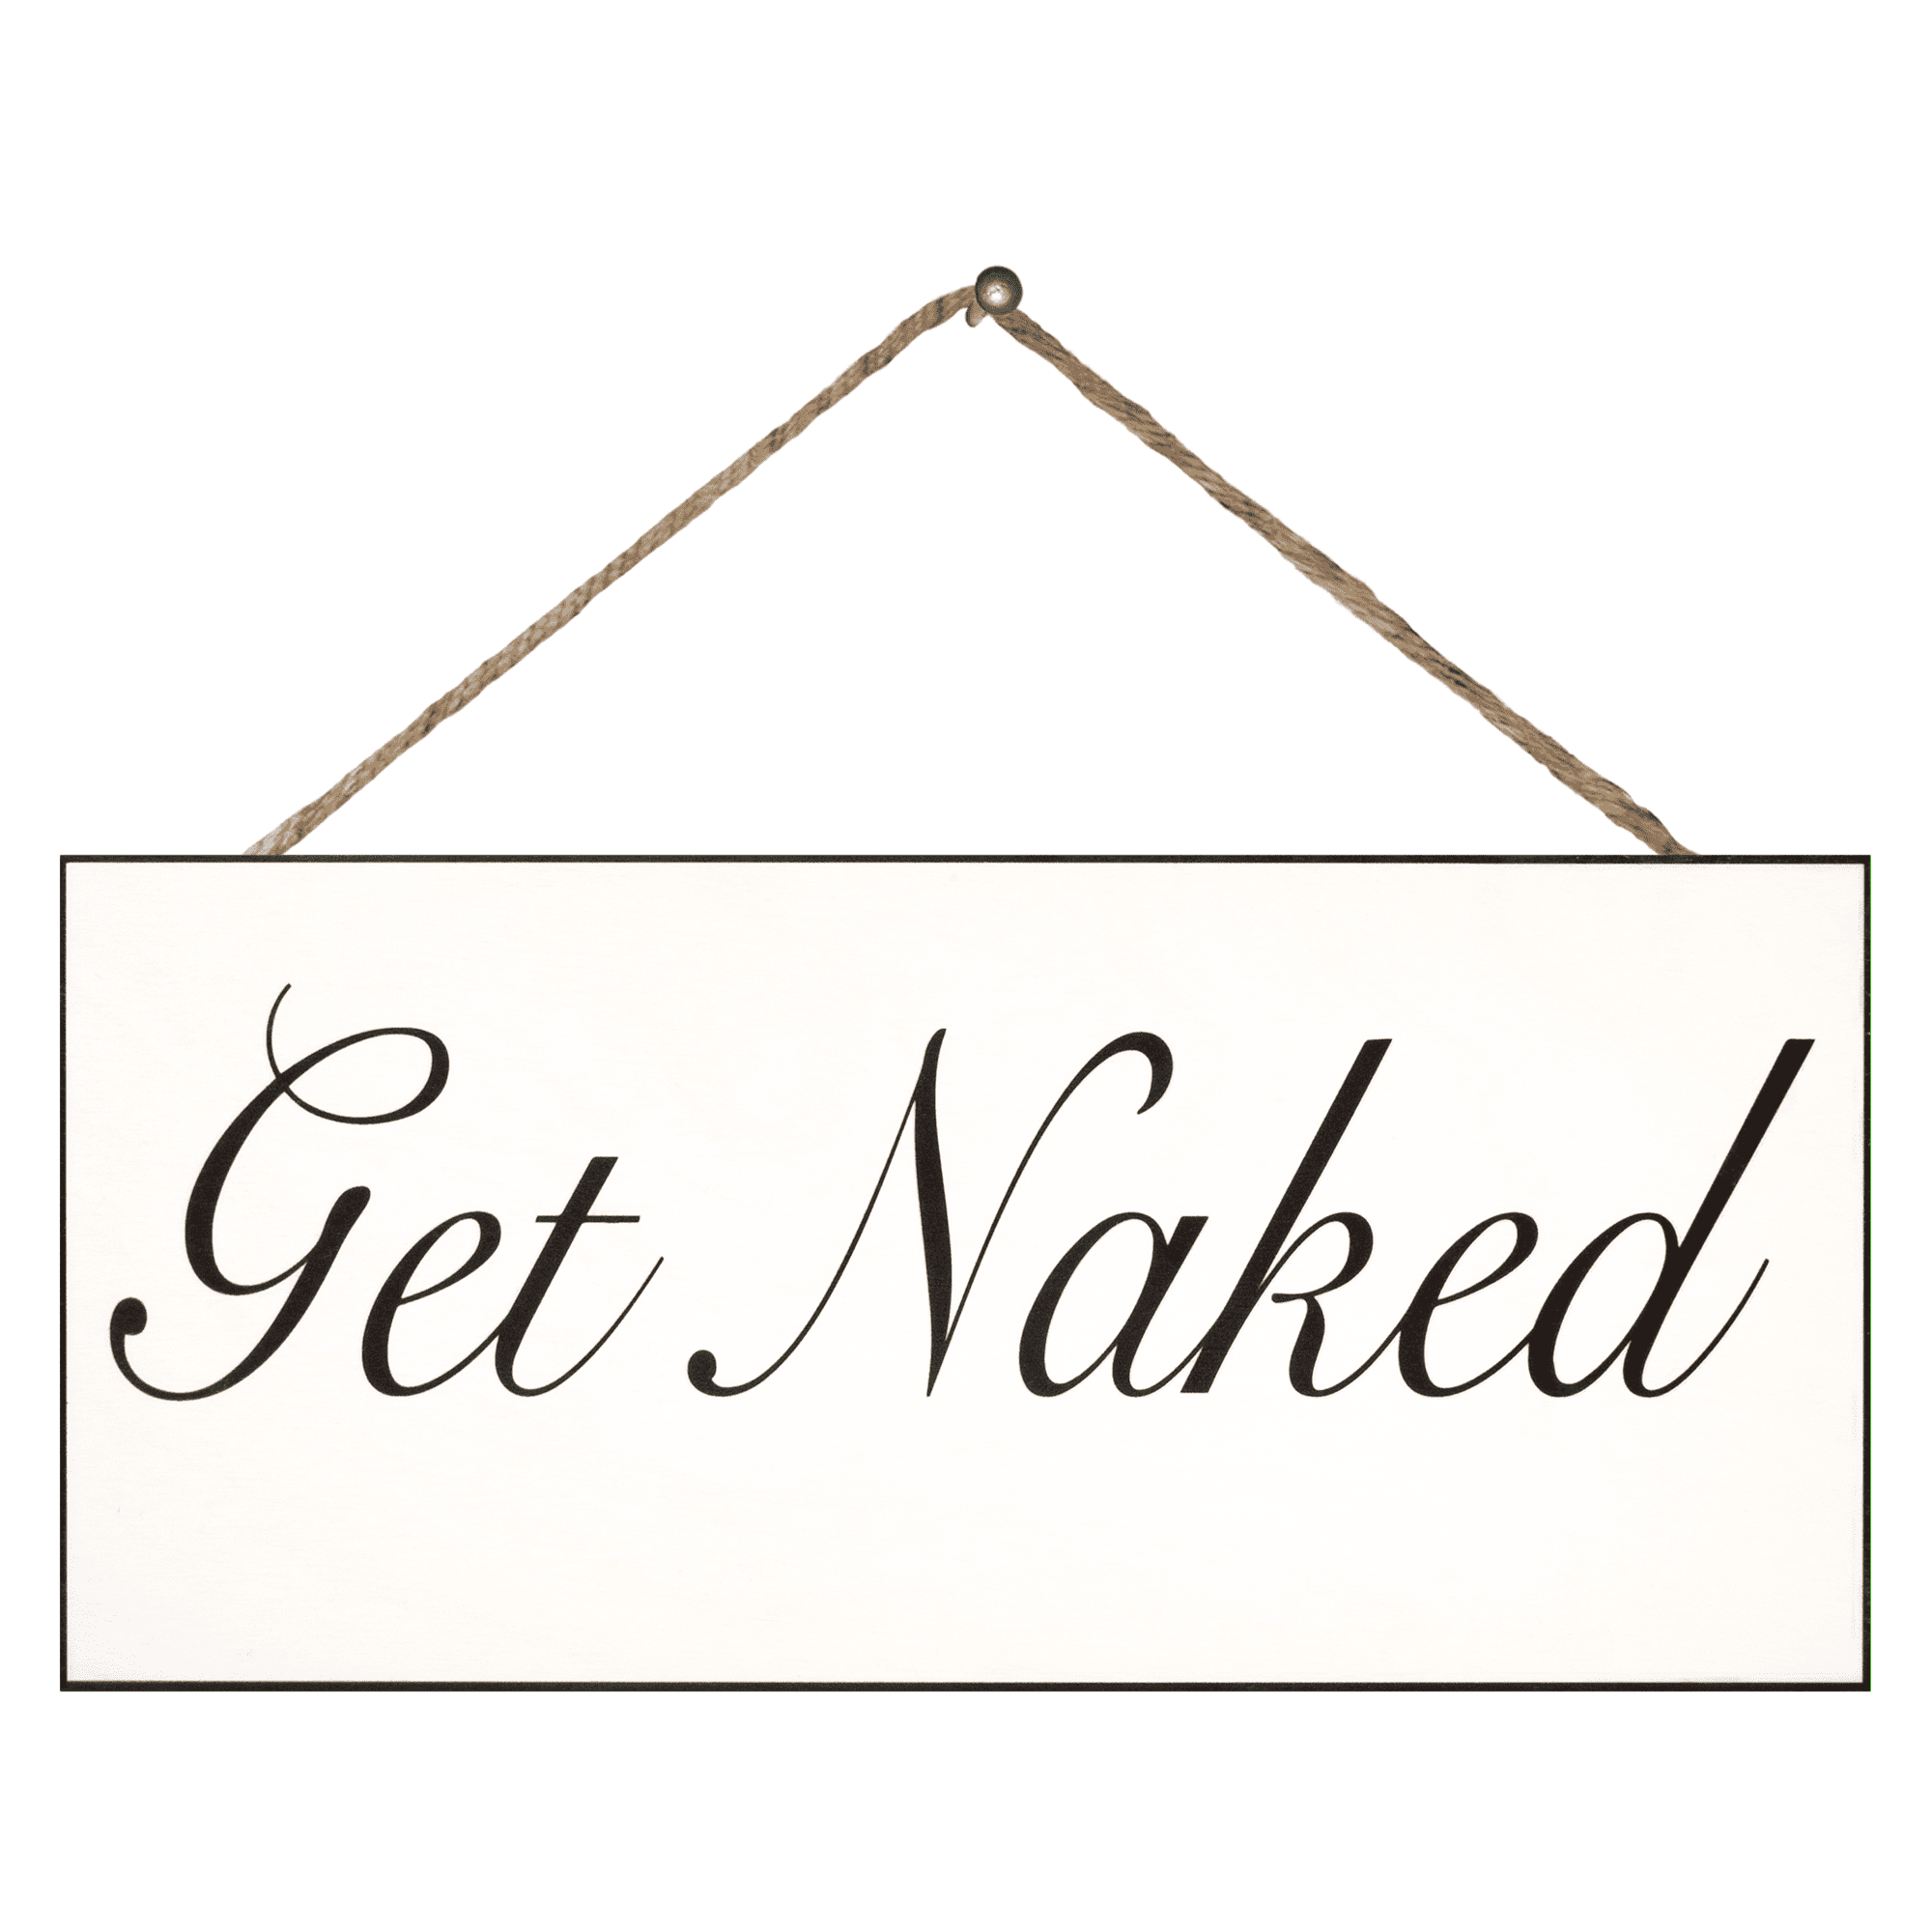 Vintage Bathroom Quote Tin Sign for Toilet Restroom Washroom Decor Gifts Funny Get Naked Bathroom Metal Tin Sign Wall Decor 